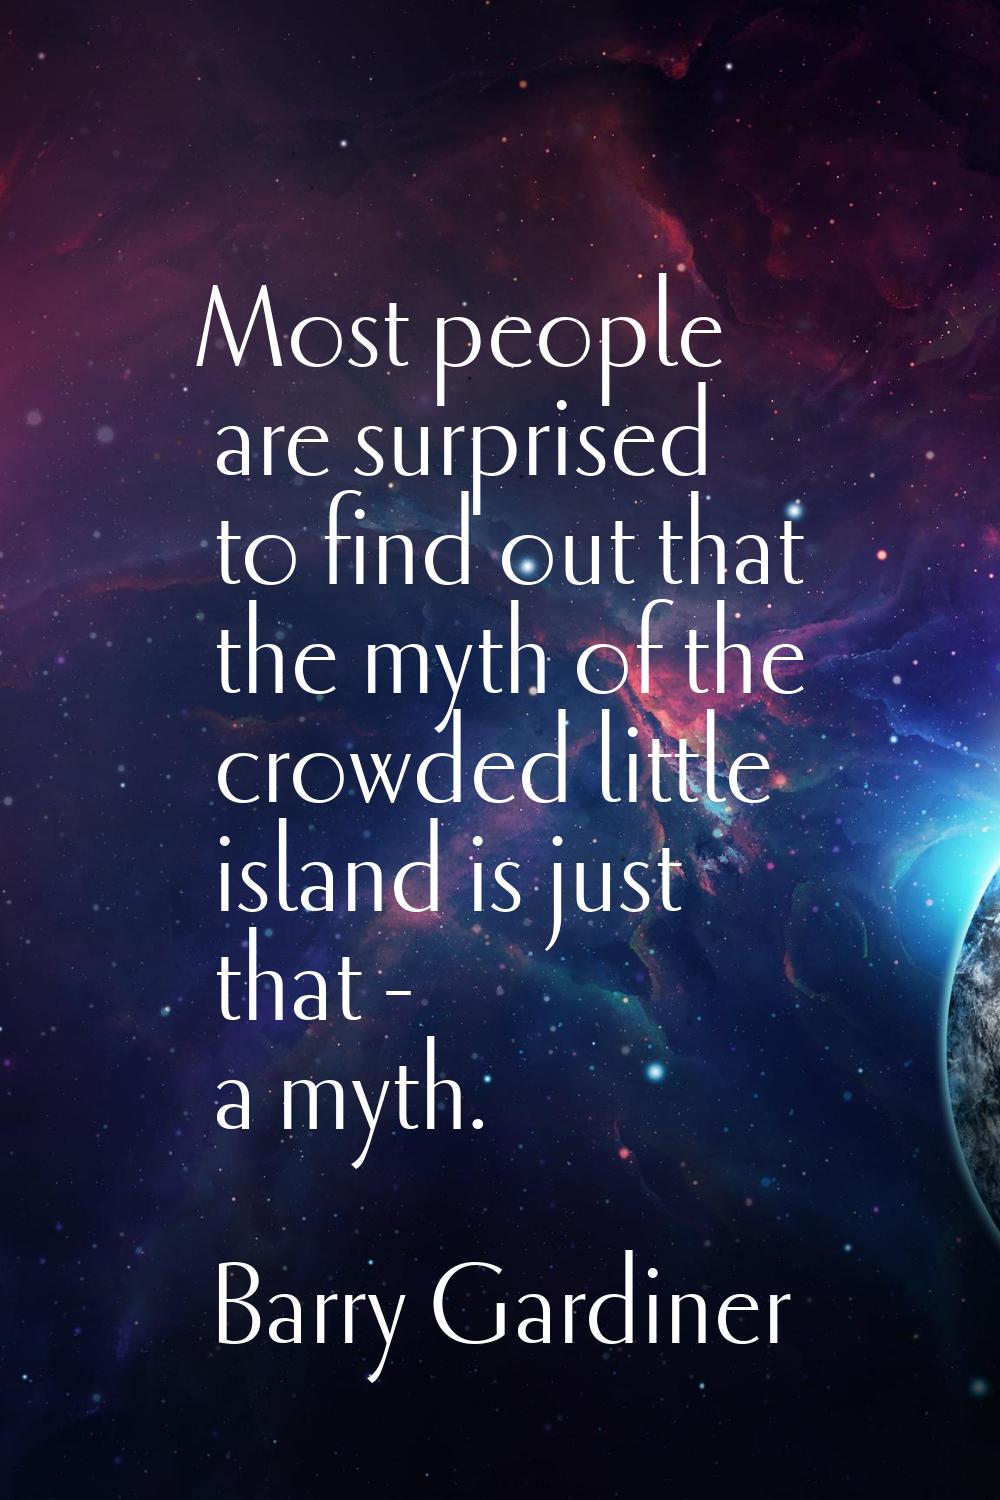 Most people are surprised to find out that the myth of the crowded little island is just that - a m